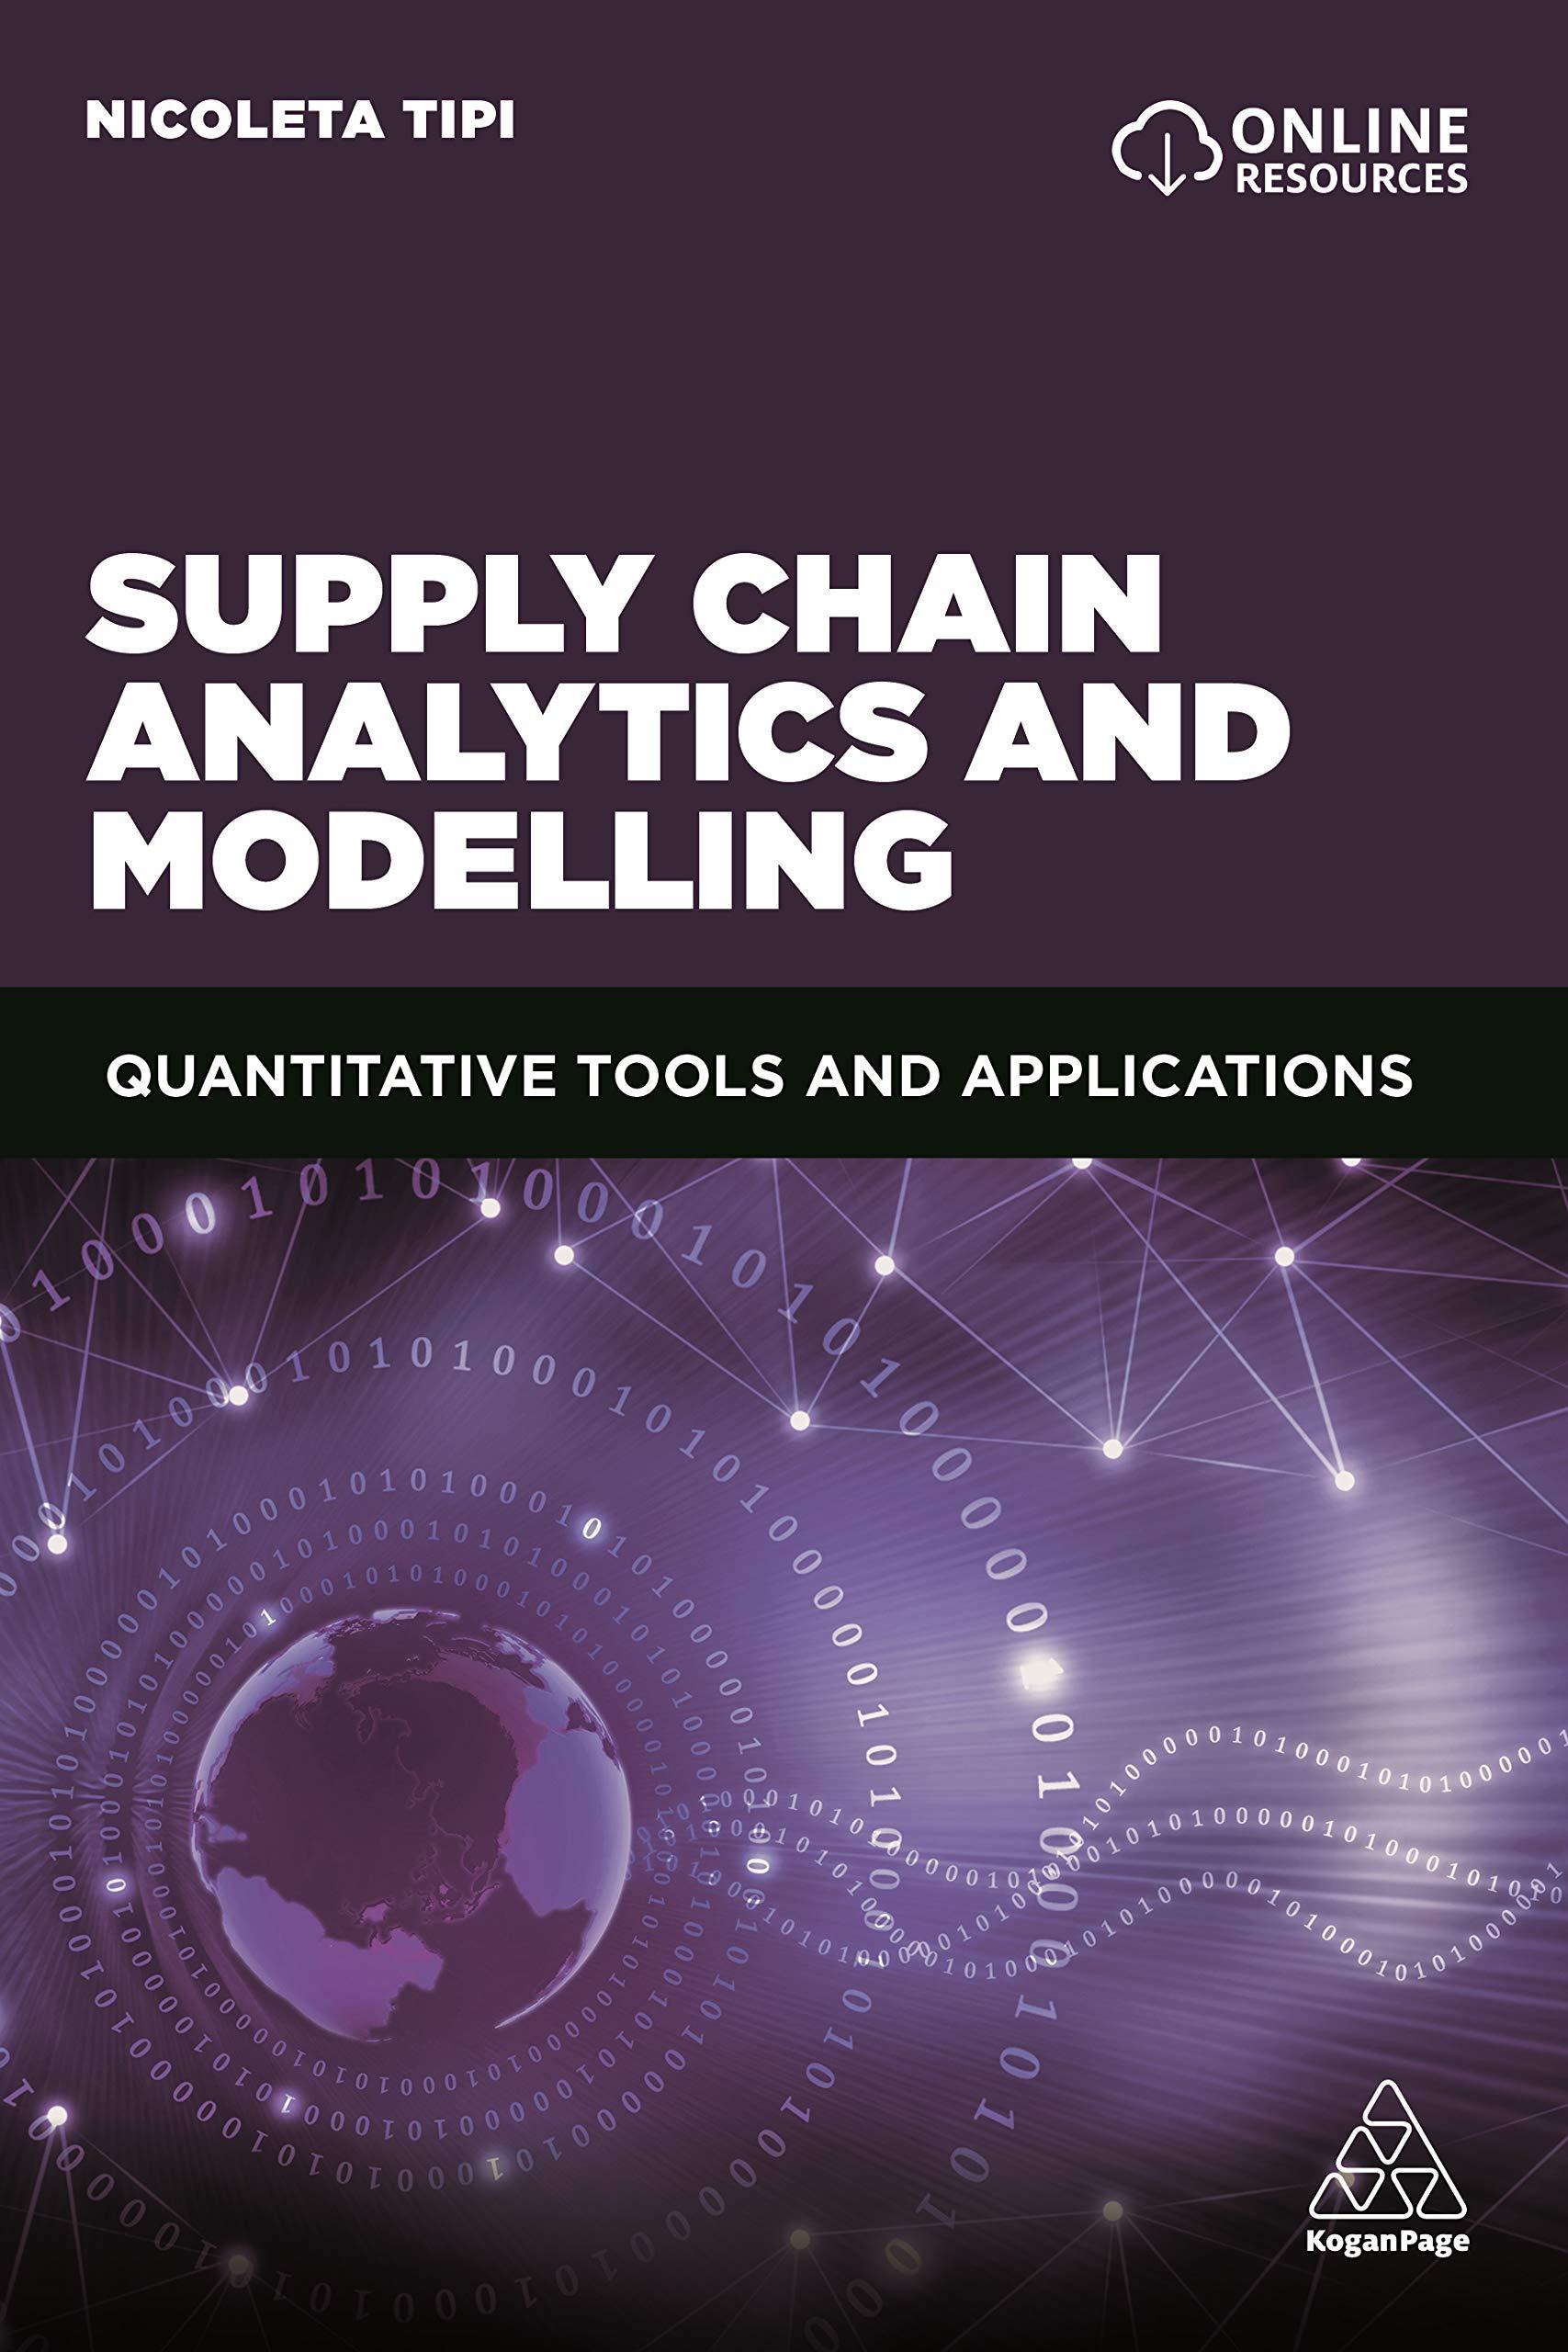 supply chain analytics and modelling: quantitative tools and applications 1st edition dr nicoletatipi